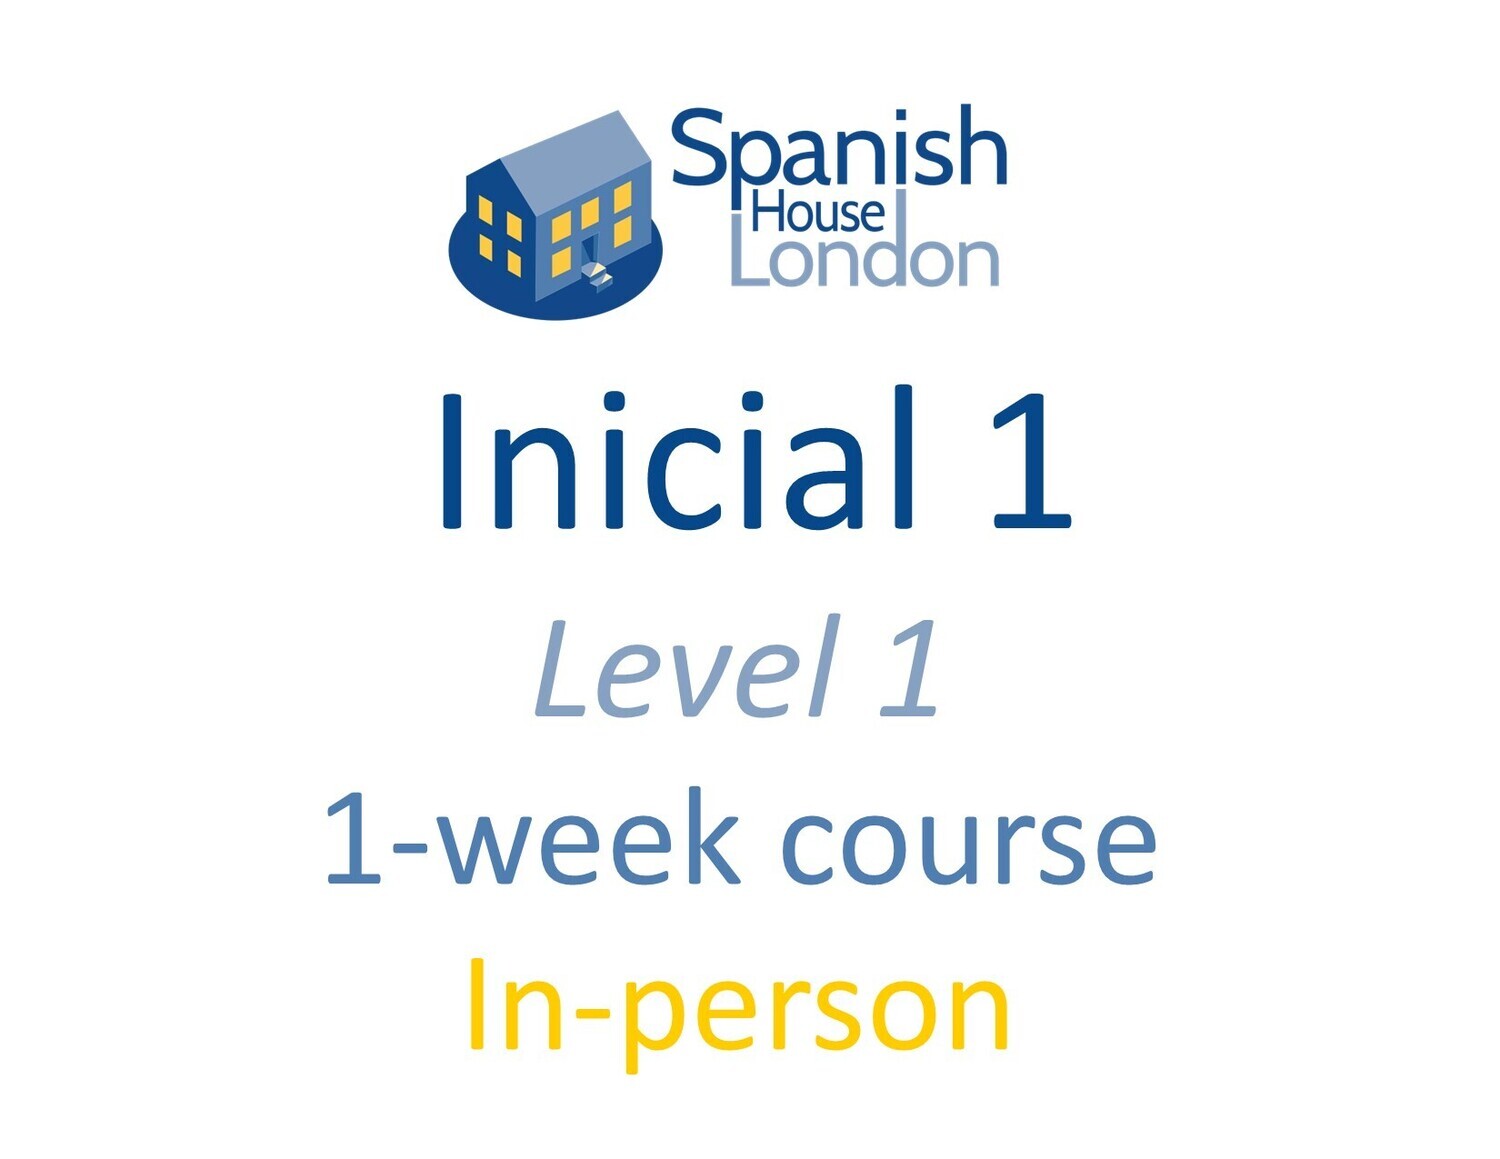 One-Week Intensive Inicial 1 Course starting on 24th January at 10am in Clapham North